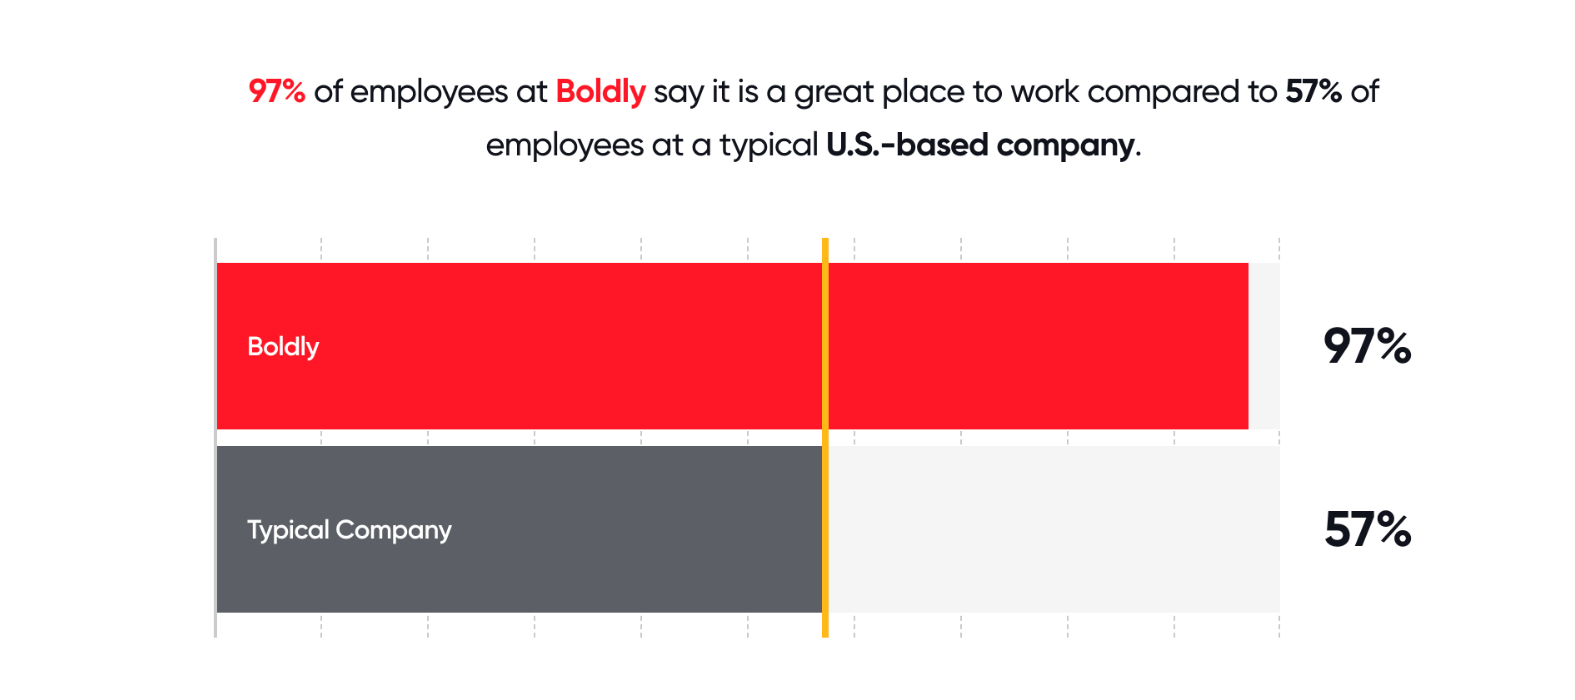 Graph showing that 97% of Boldly employees say Boldly is a great place to work compared to 57% at a typical company.